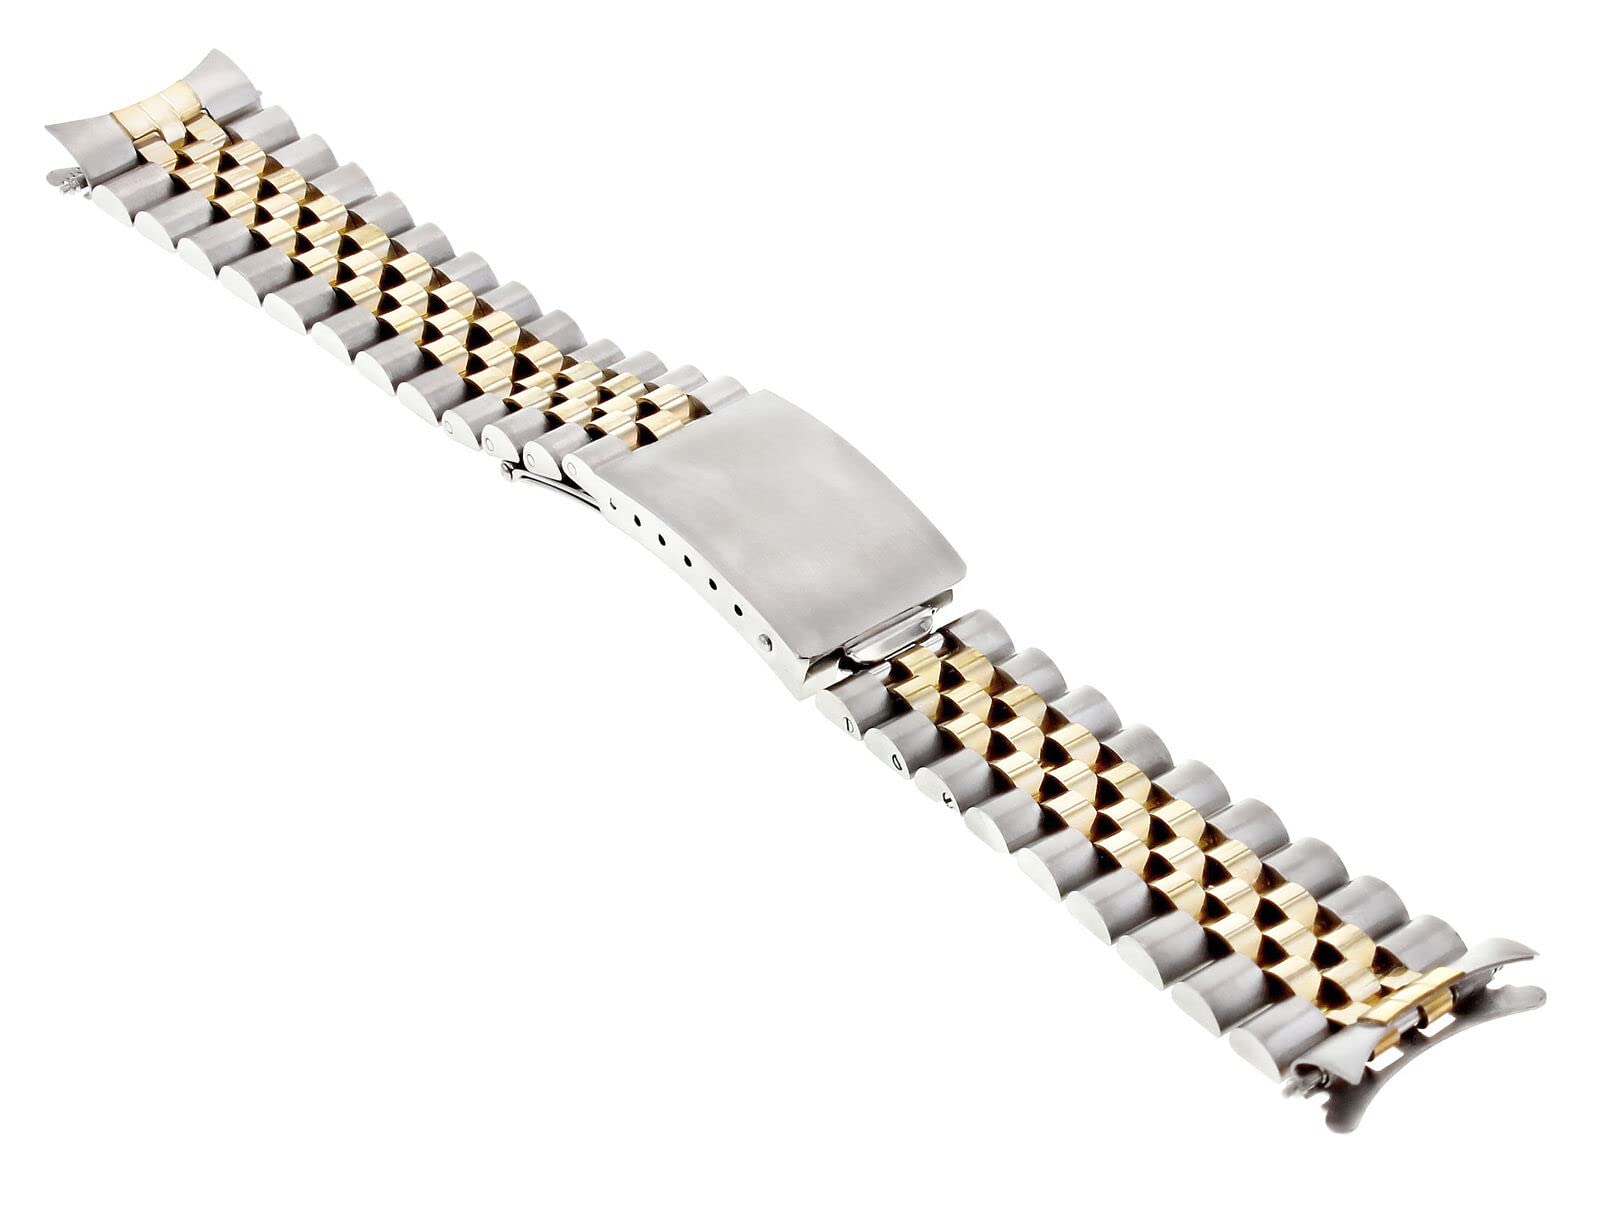 Ewatchparts 20MM 14K JUBILEE WATCH BAND COMPATIBLE WITH ROLEX DATEJUST 16078 16200 16203 GMT 16710 T/TON